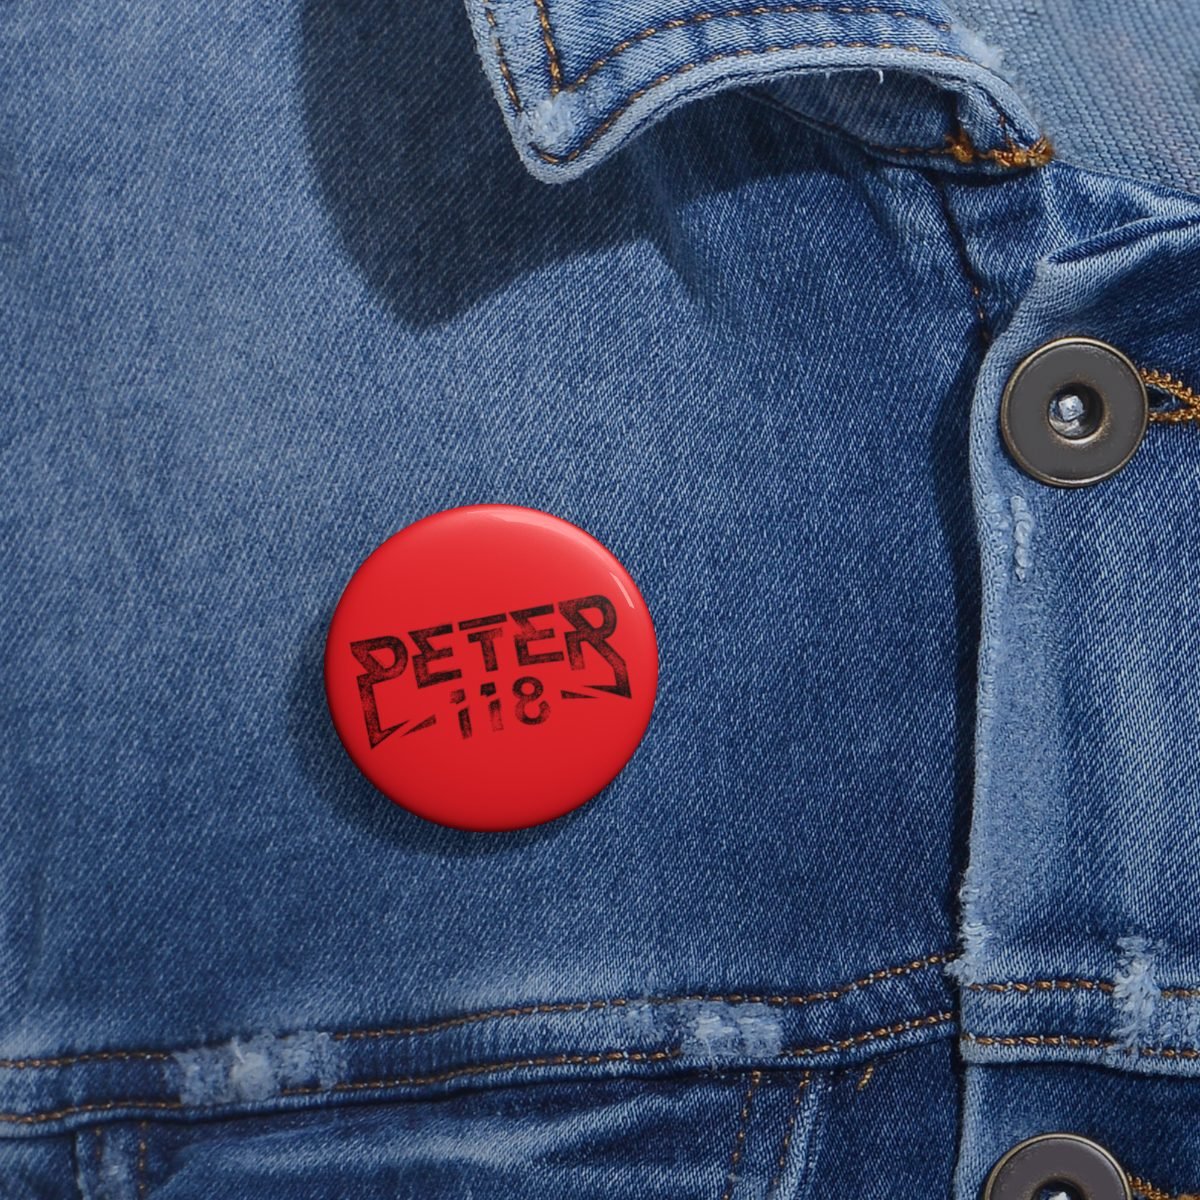 Peter118 Logo Pin Buttons (Red)